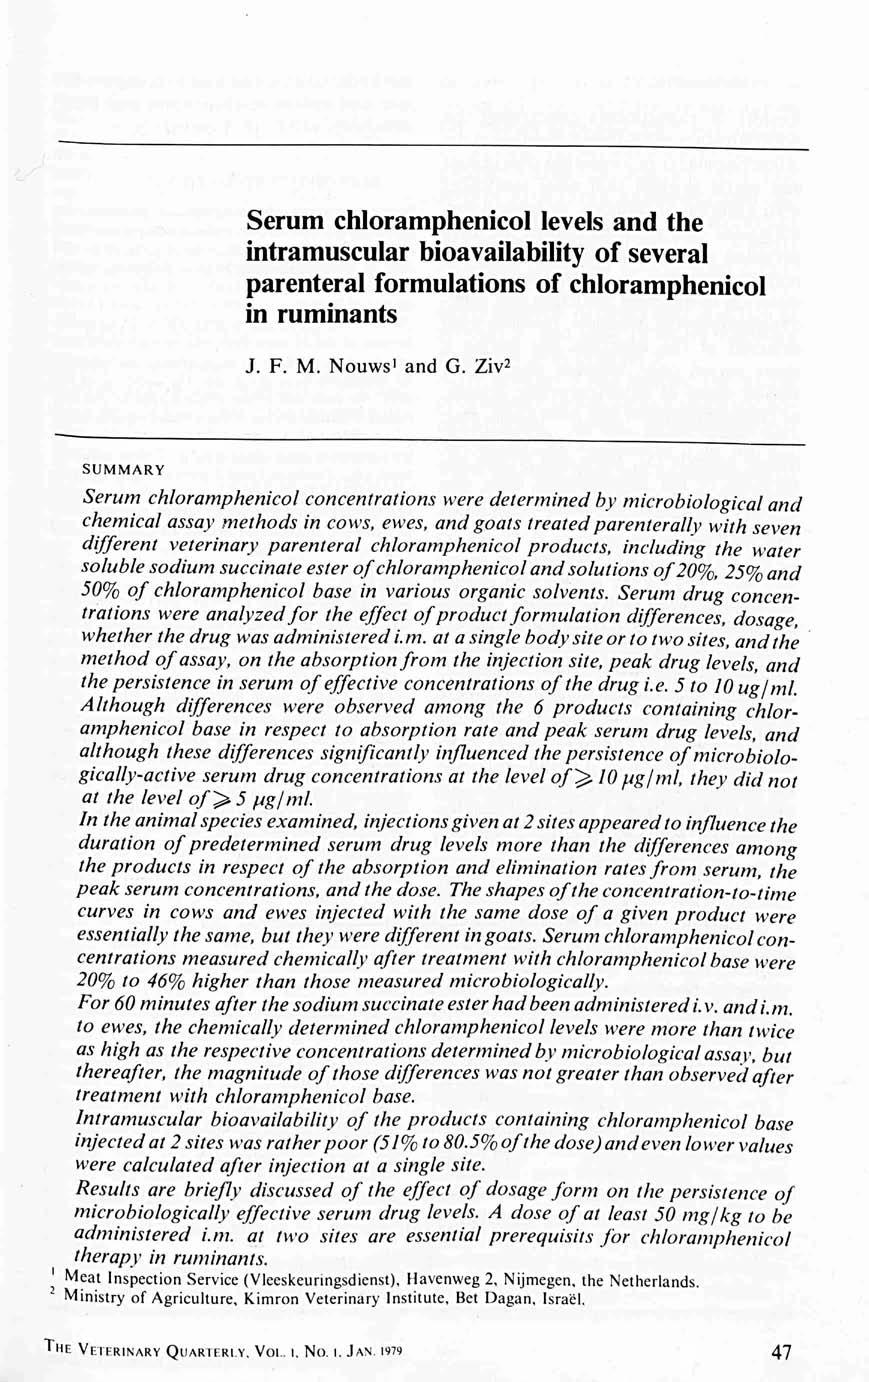 Serum chloramphenicol levels and the intramuscular bioavailability of several parenteral formulations of chloramphenicol in ruminants J. F. M. Nouwsl and G. Ziv2 Downloaded by [37.44.207.